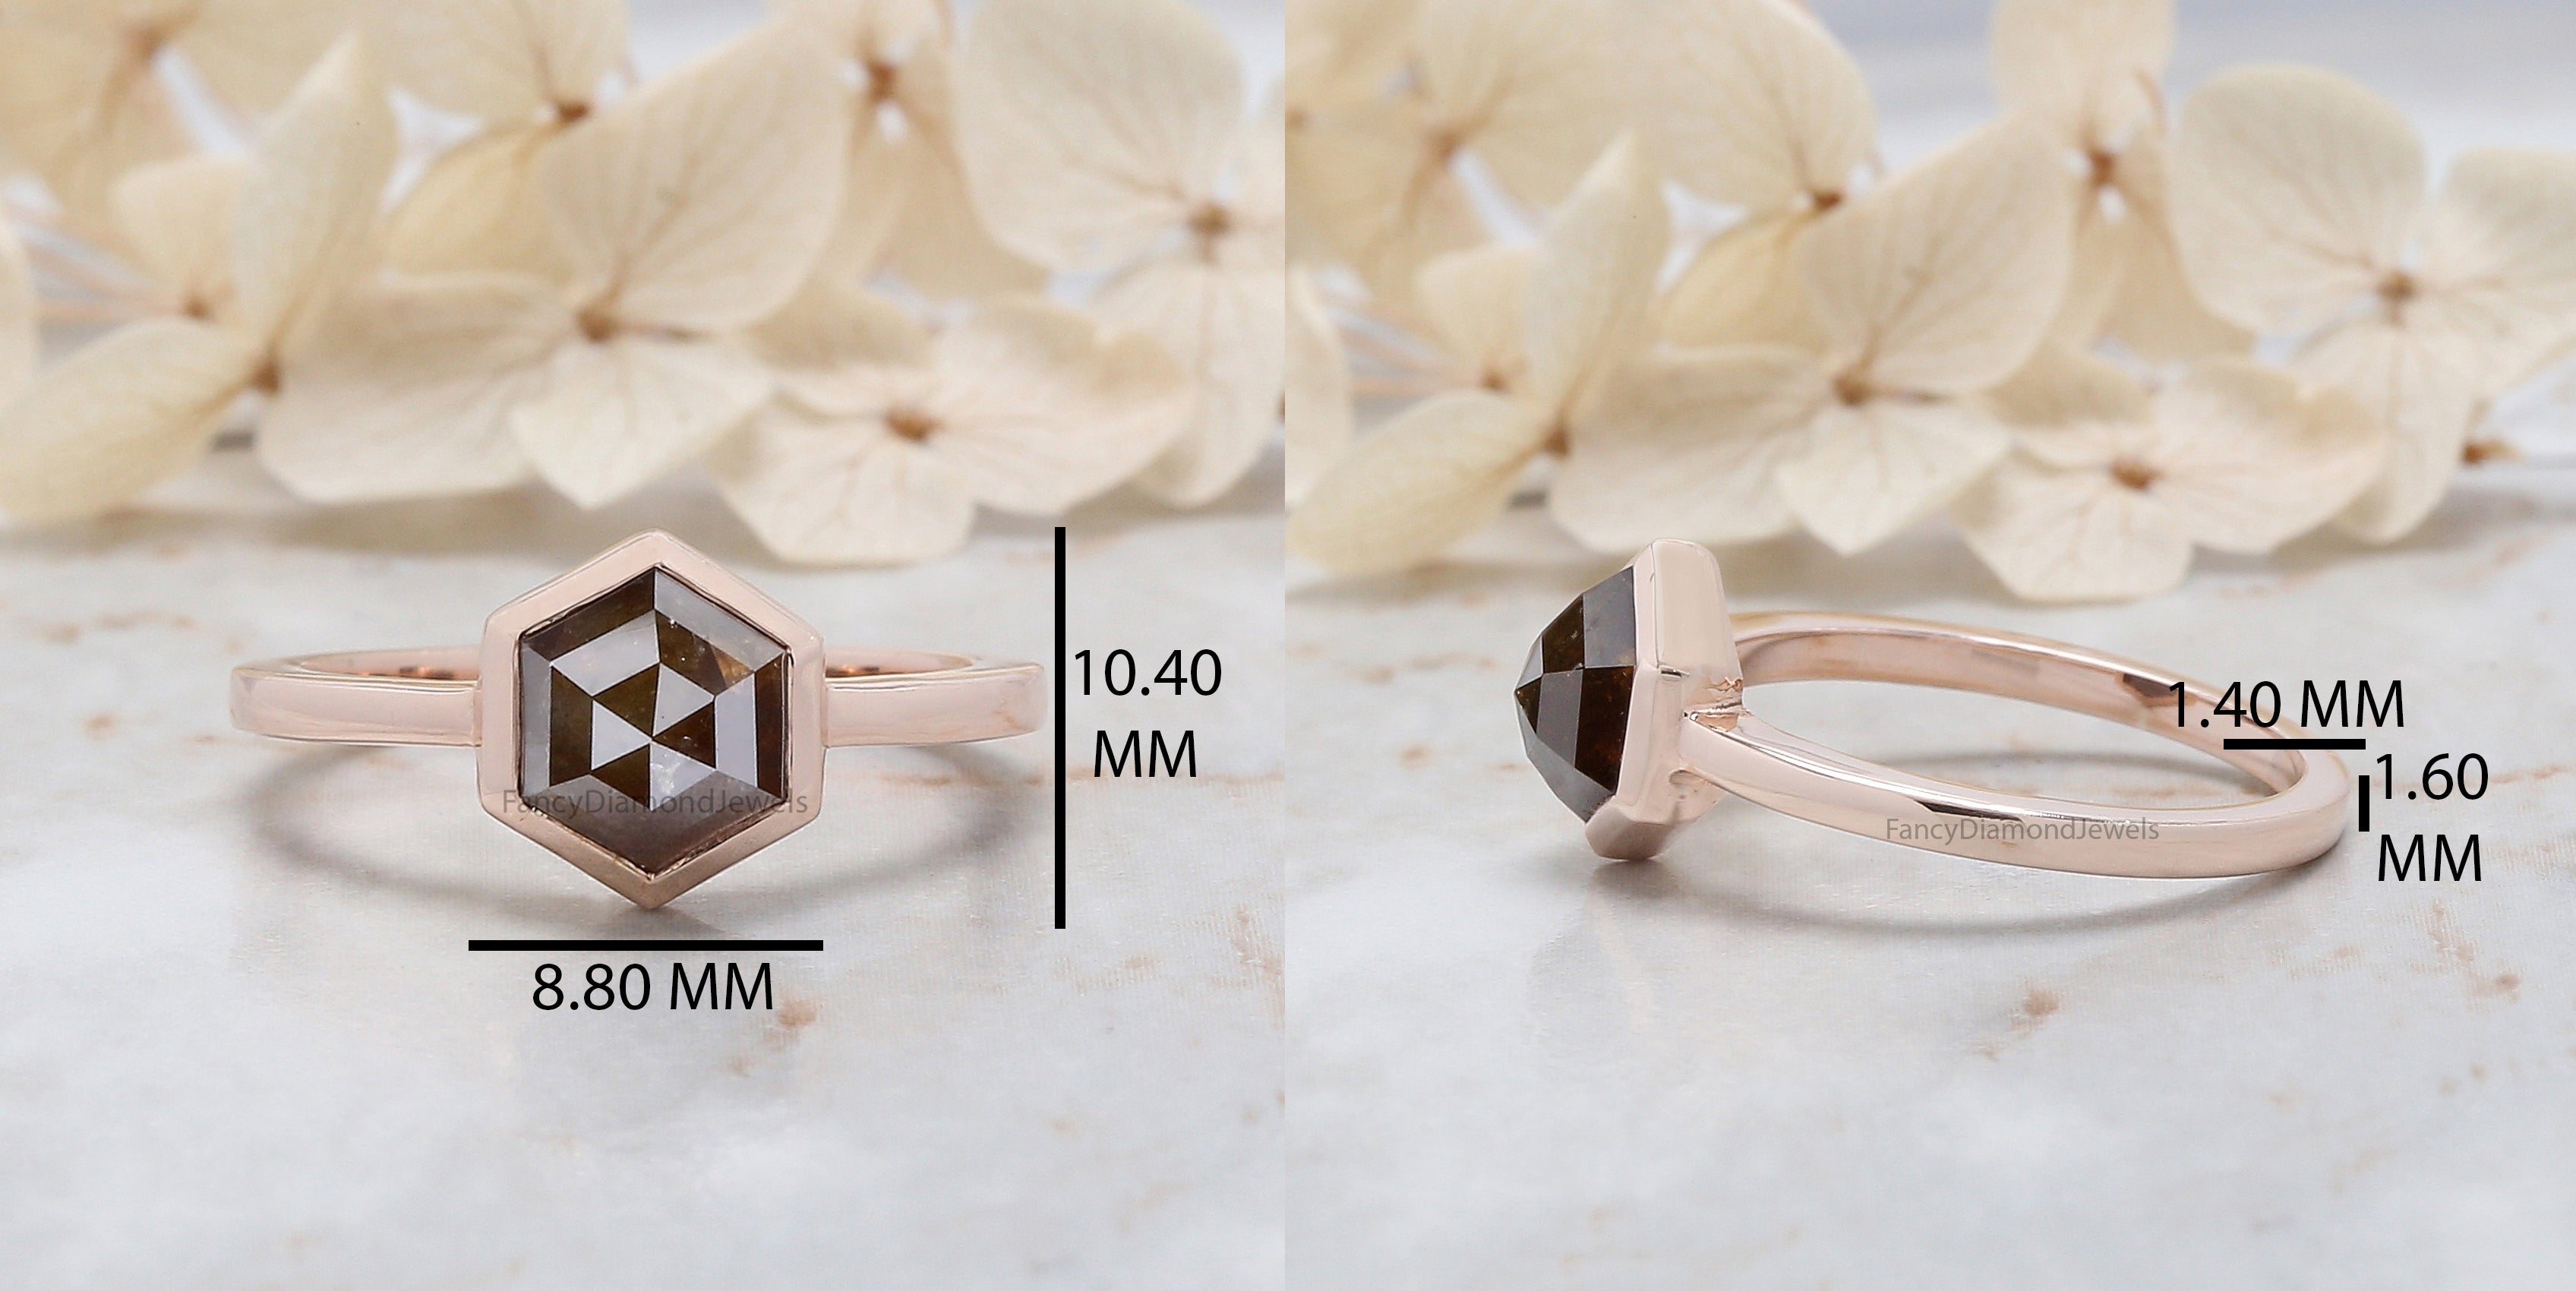 Hexagon Cut Brown Color Diamond Ring 2.26 Ct 6.90 MM Hexagon Shape Diamond Ring 14K Rose Gold Silver Engagement Ring Gift For Her QN9237